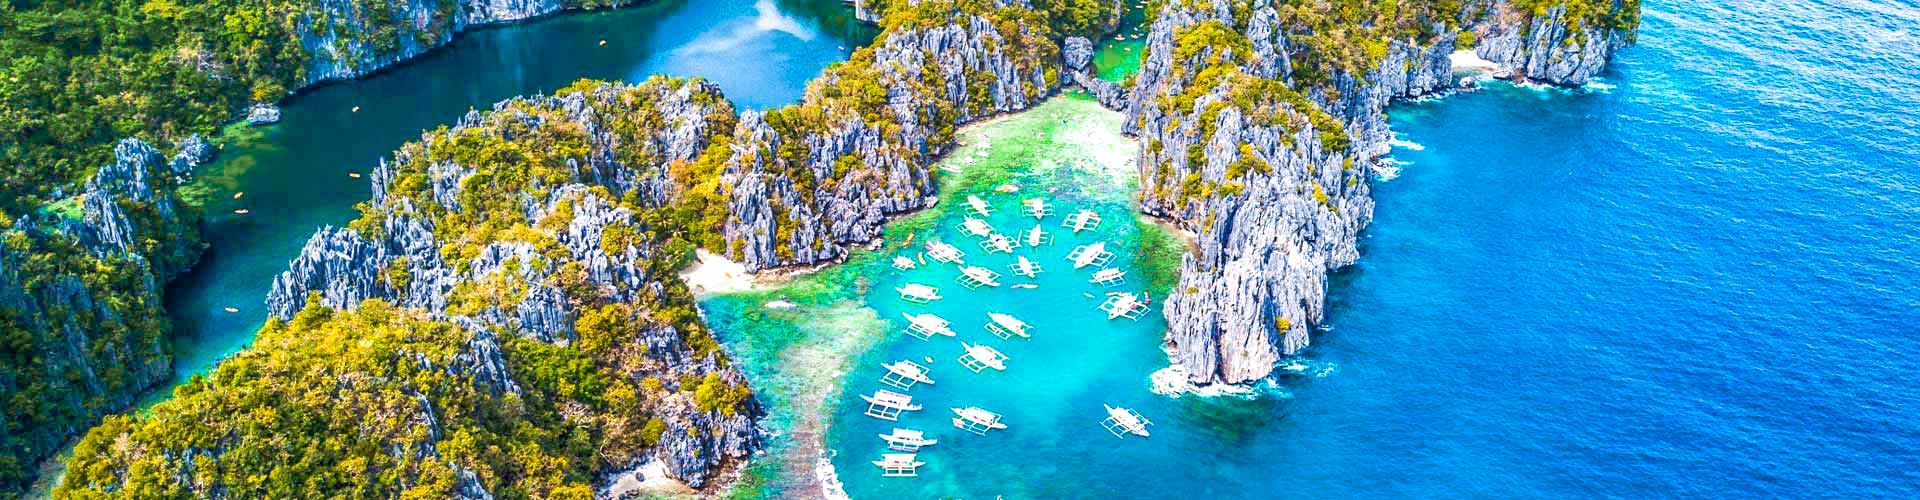 About Philippines Discovery - Local Philippines Travel Agency